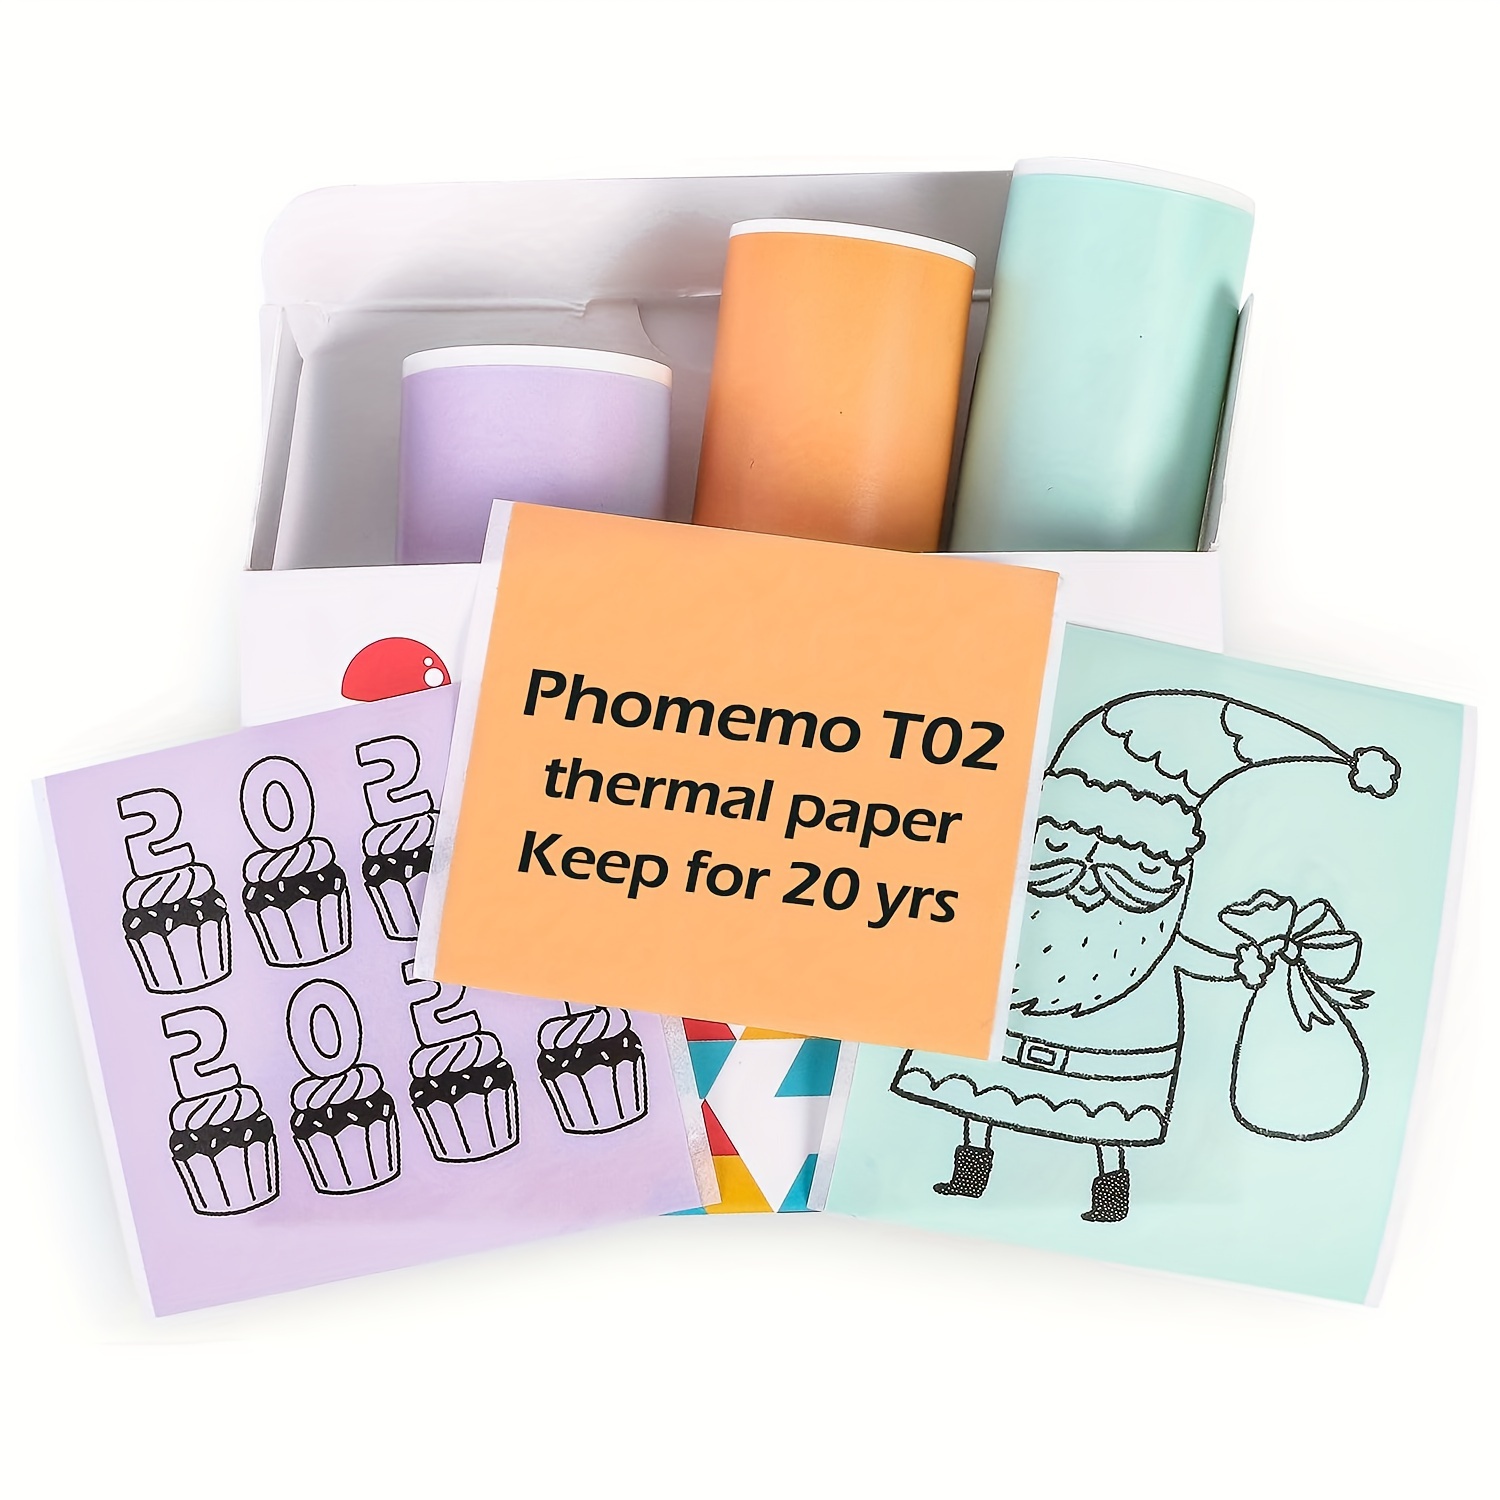 

Phomemo T02 Mint Green/lavender Purple/light Orange, Adhesive Thermal Paper, Color Printer Paper, Compatible With T02/m02x/m02l, 1.96" X 11.4' (50mmx3.5mm)/roll, Black Text, Keep For 20 Years, 3 Rolls